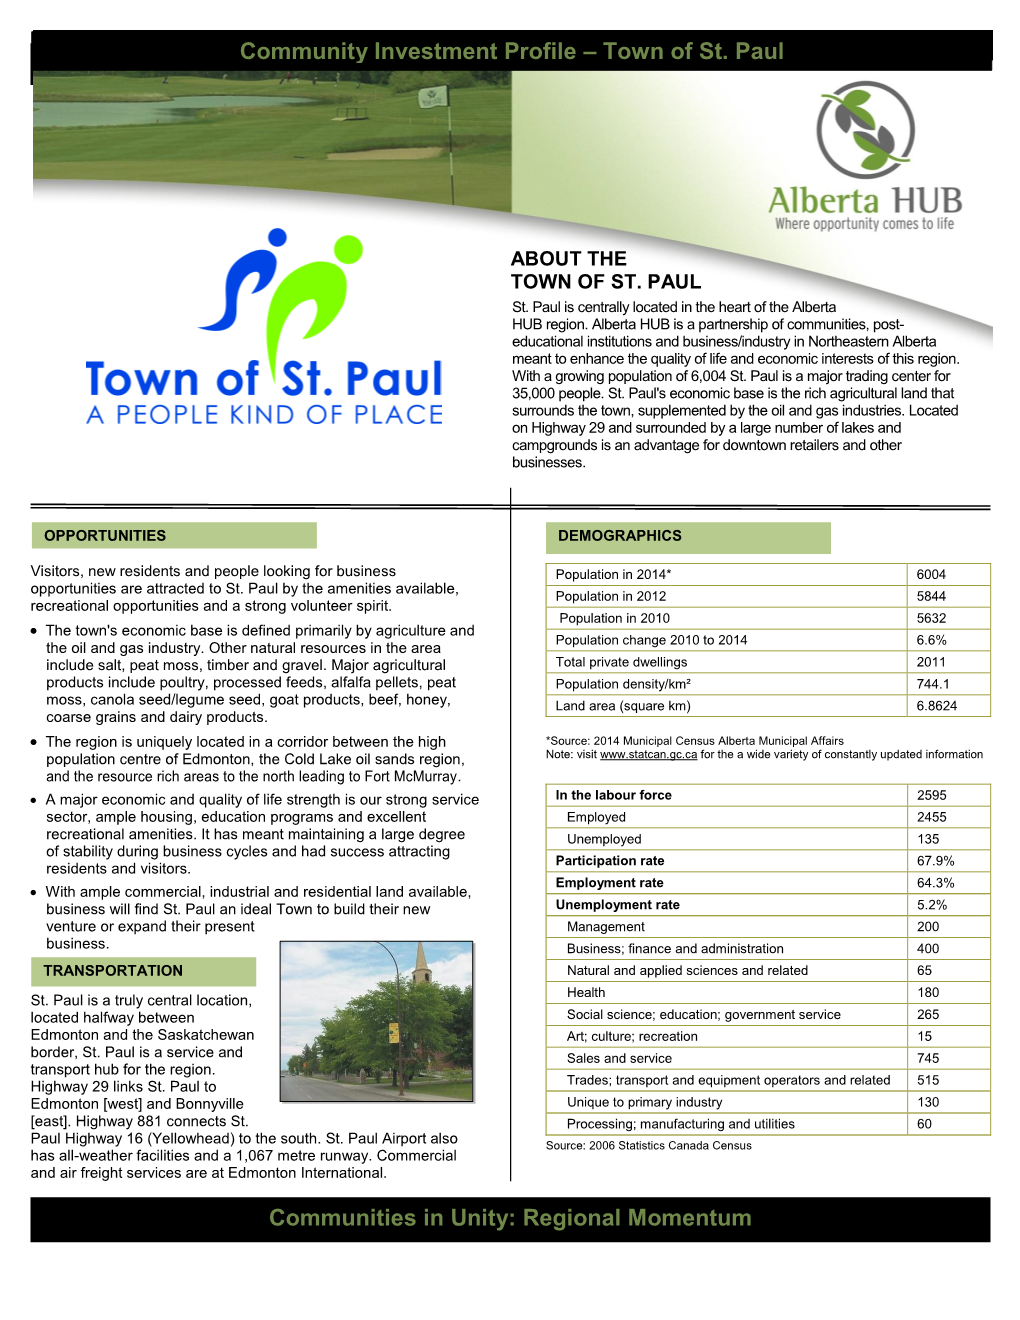 Community Investment Profile – Town of St. Paul Community Investment Profile – Town of St